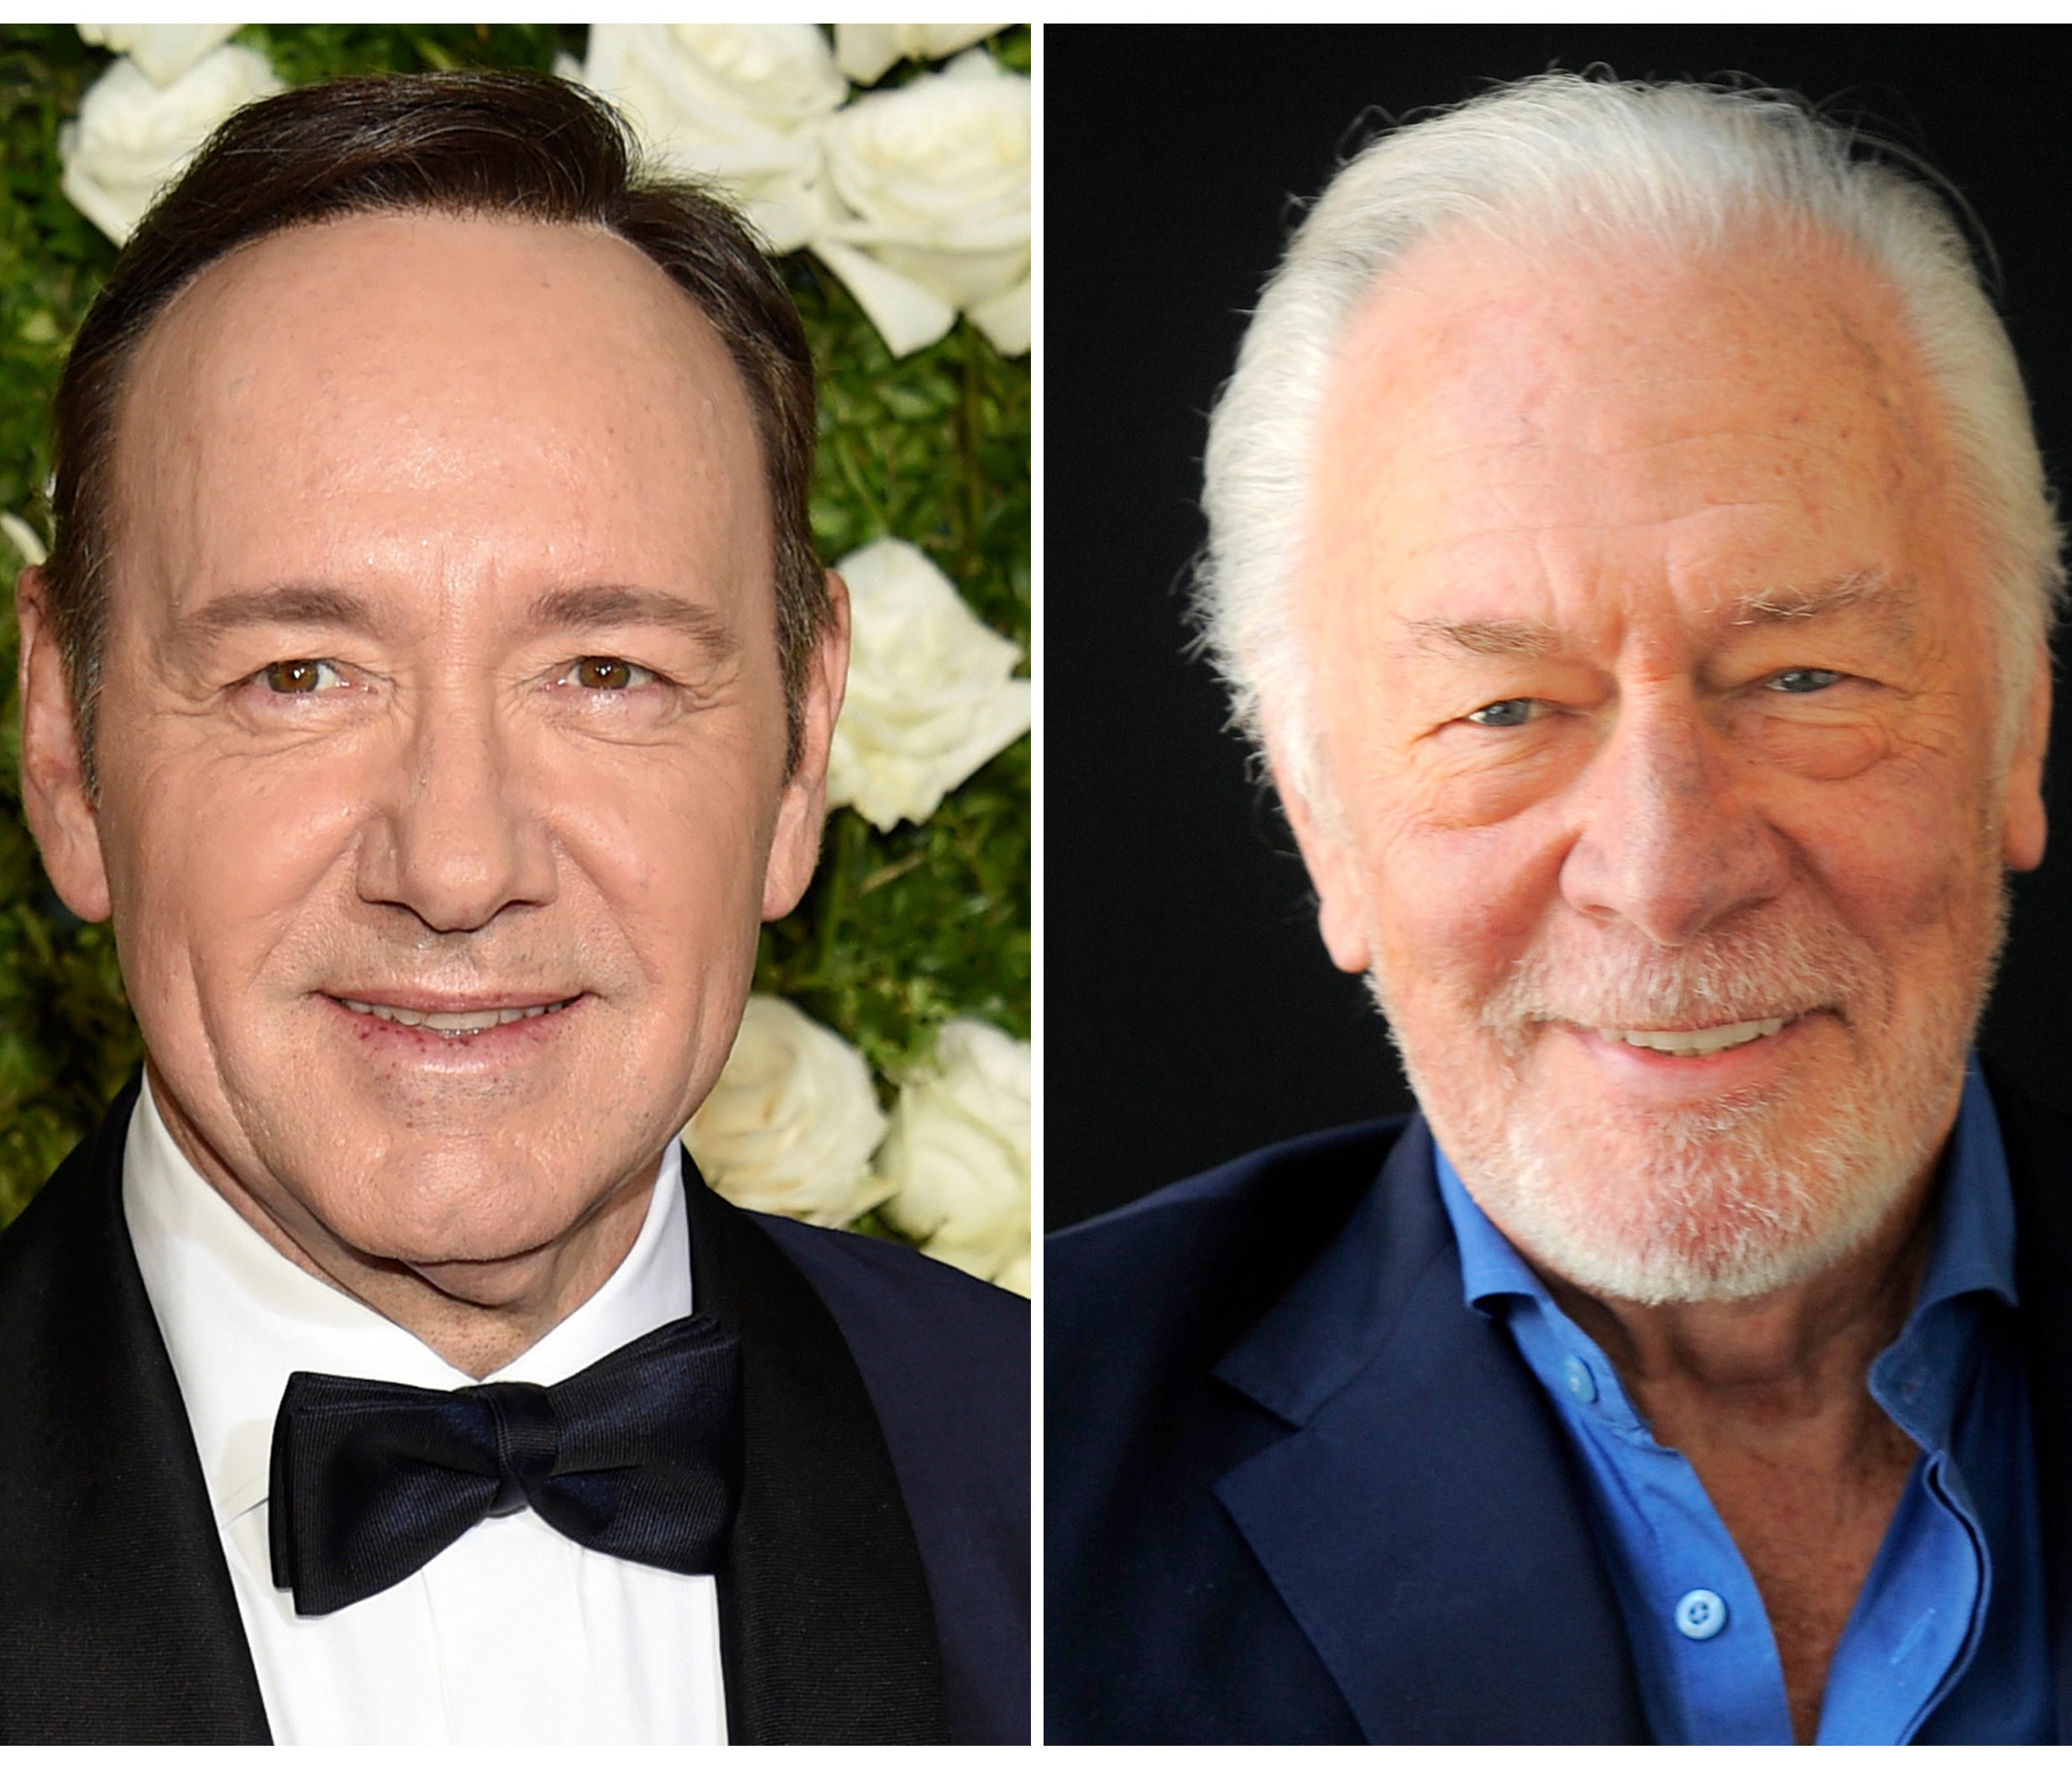 This combination photo shows Kevin Spacey at the Tony Awards in New York on June 11, 2017, and Christopher Plummer during a portrait session in Beverly Hills on July 25, 2013.